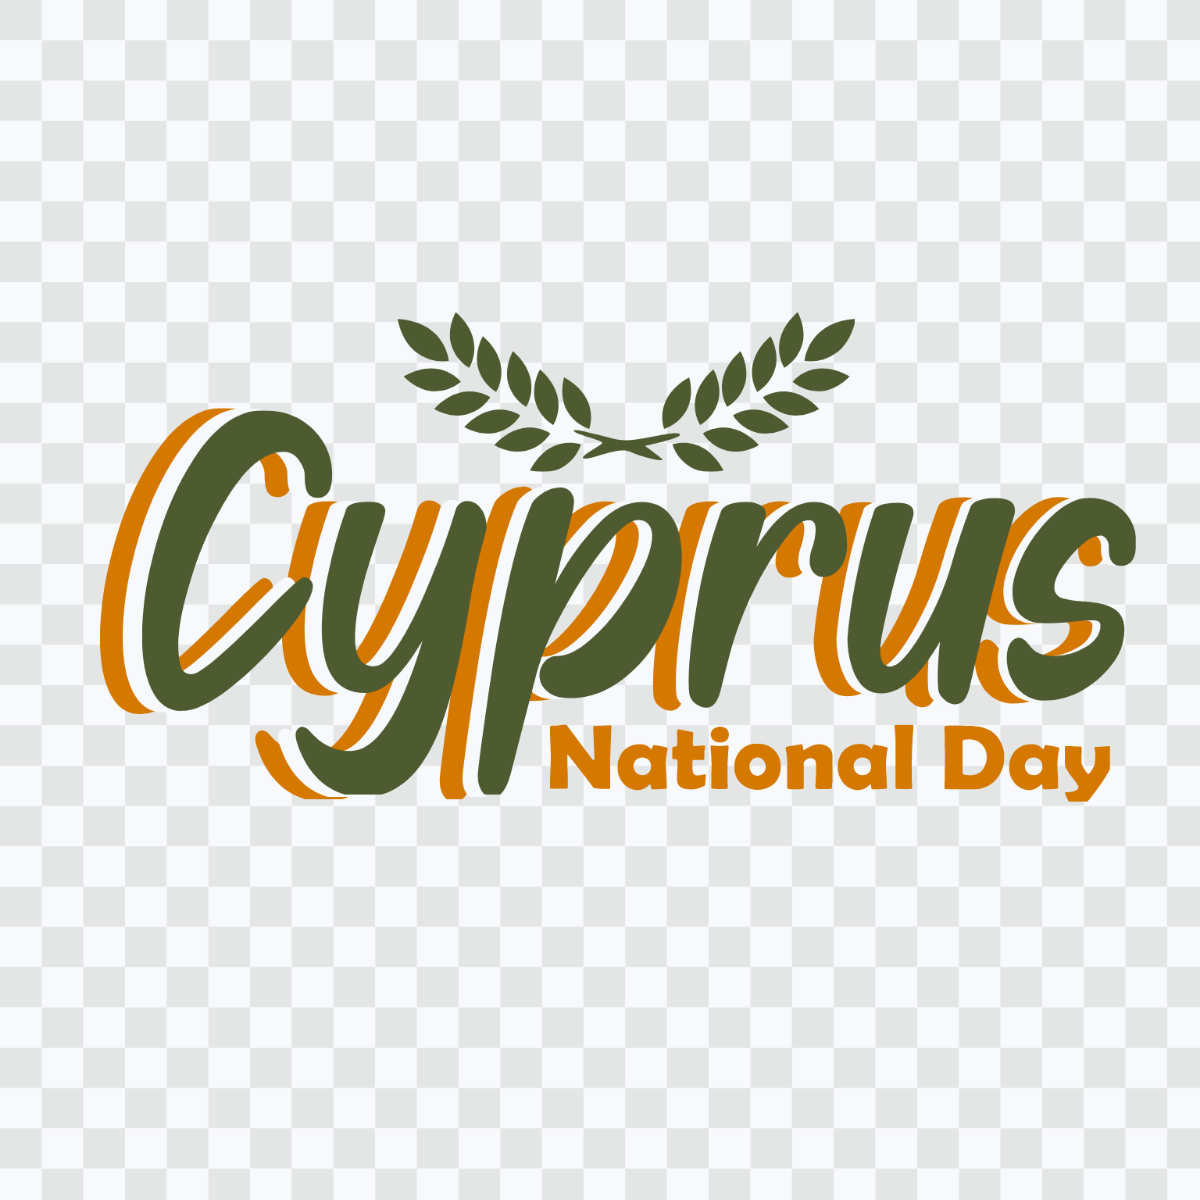 Cyprus National Day Text Effect Template